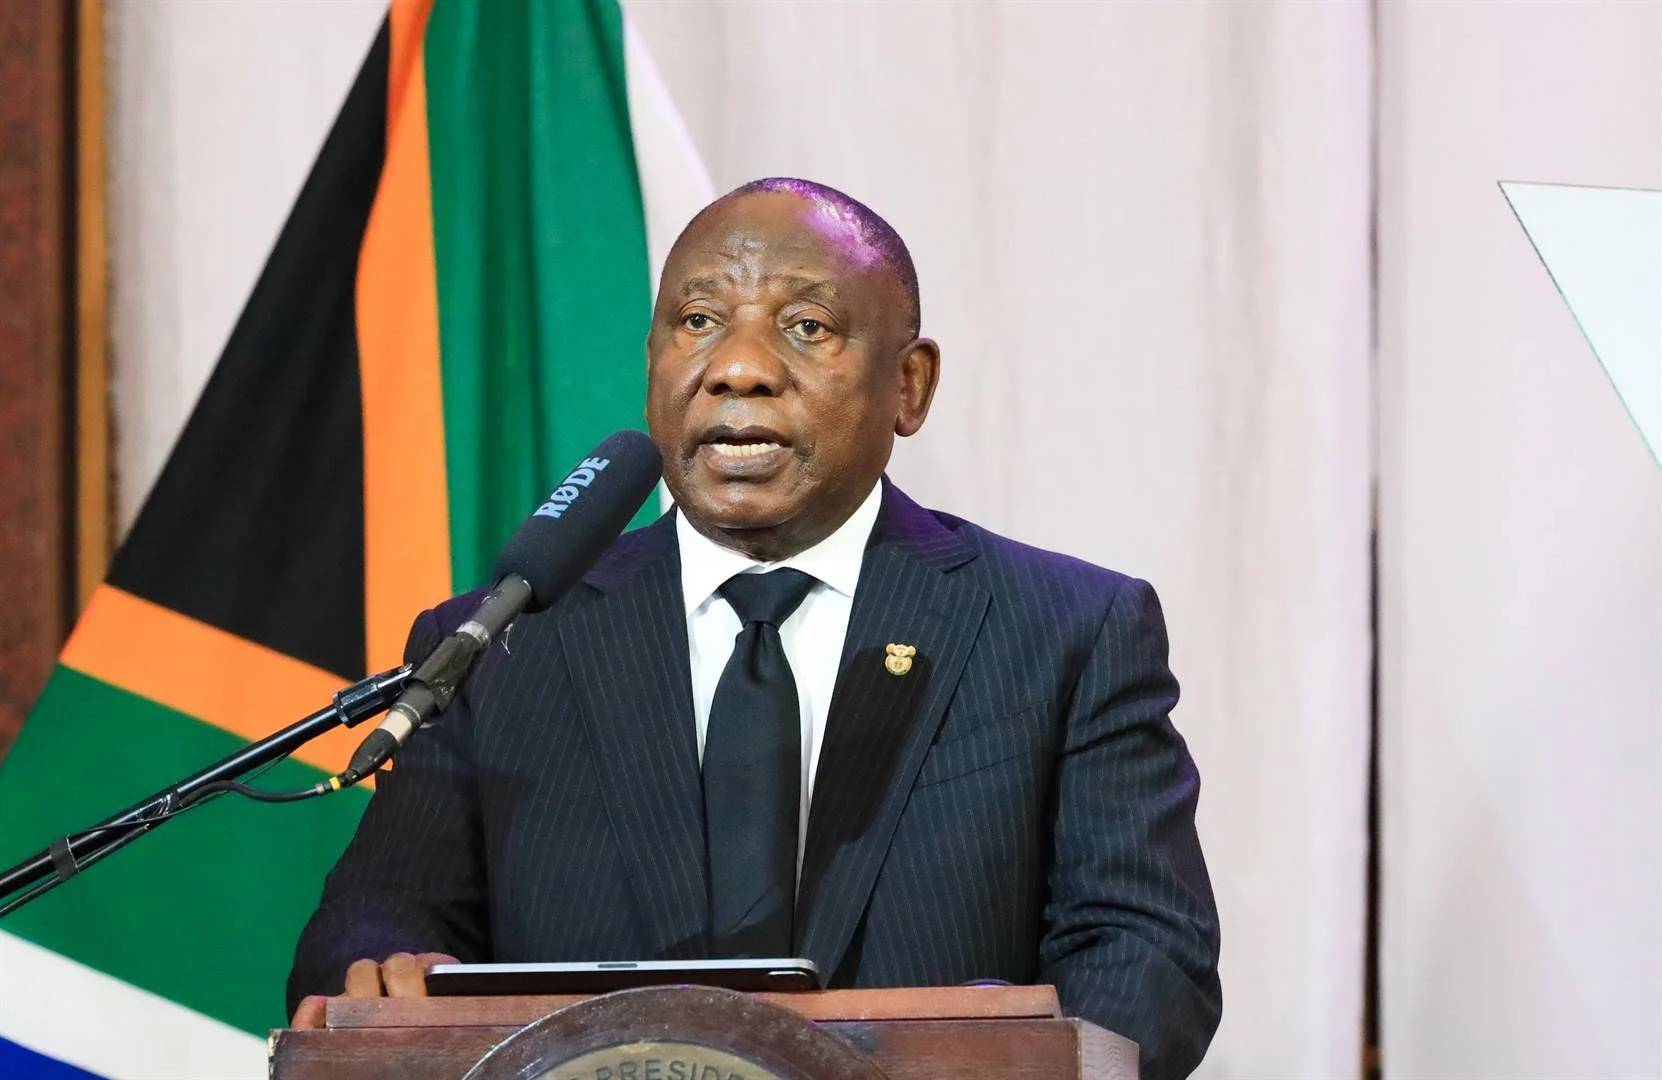 President Cyril Ramaphosa is unlikely to announce a date for the upcoming general elections during his state of the nation address on Thursday, according to his spokesperson 